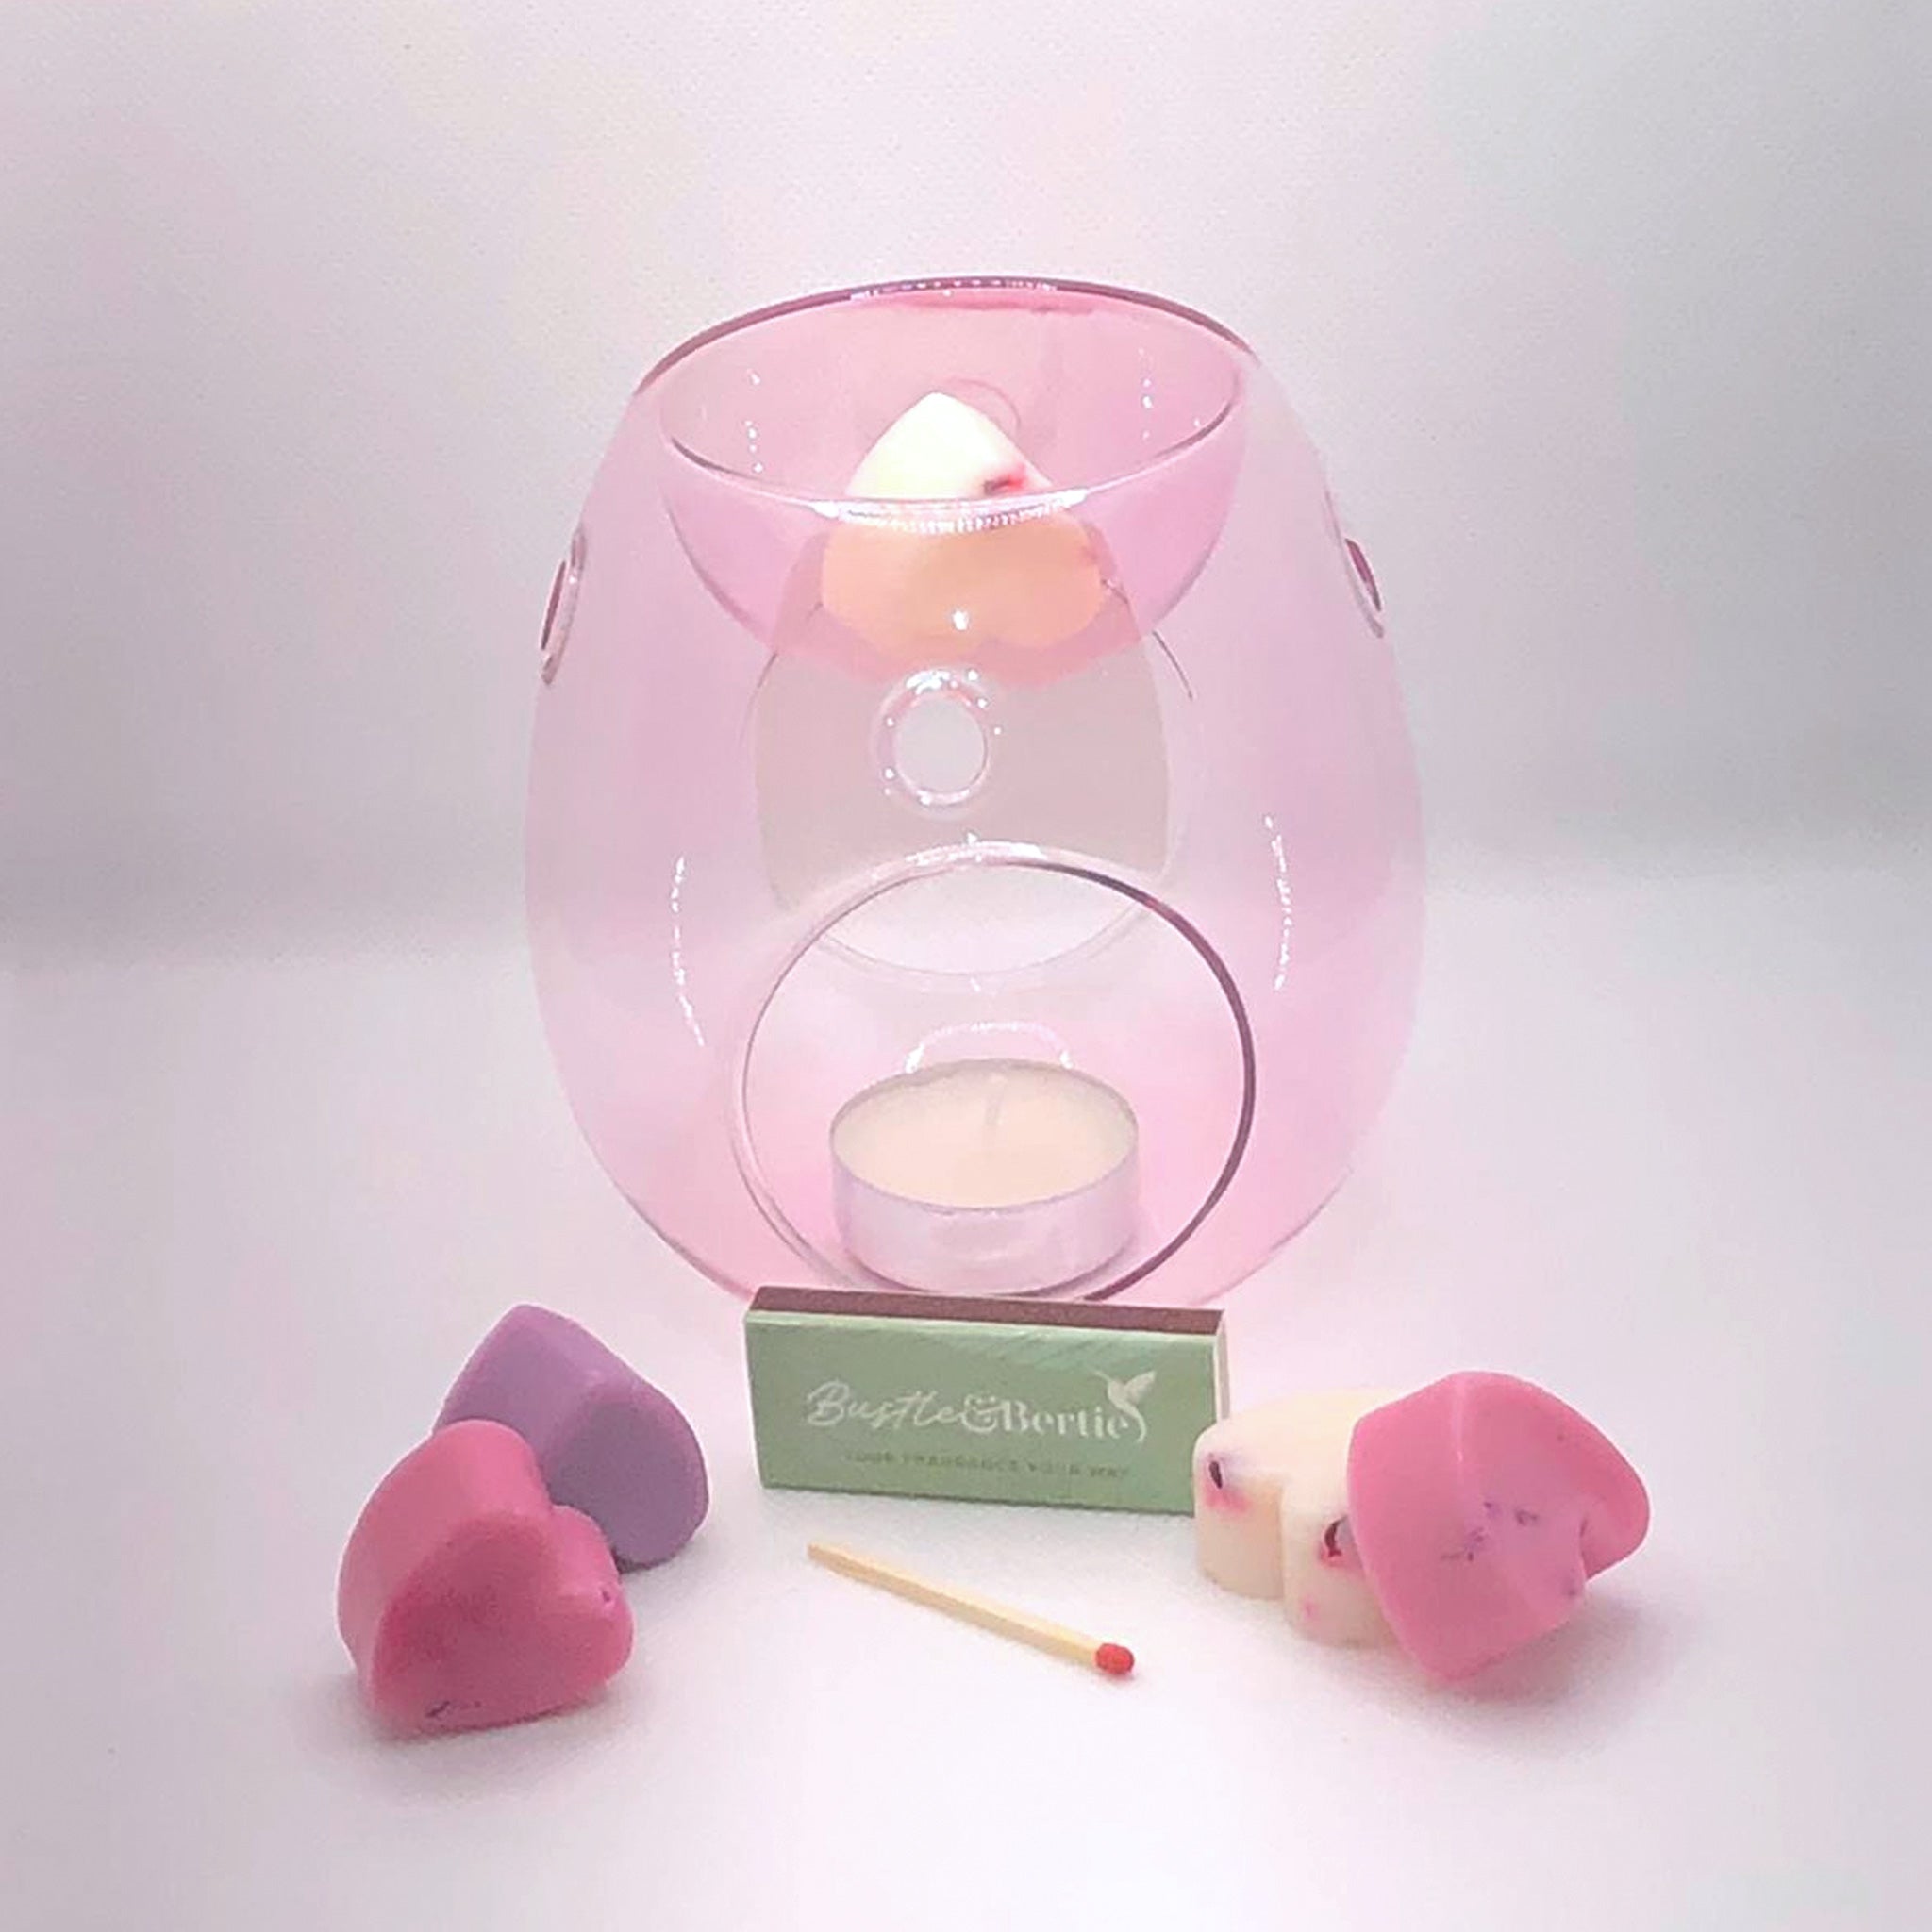 Rose Pink Wax Melt Burner with 6X Melts.Please choose fragrance from our selection you wish to have in and add them to the order in your notes